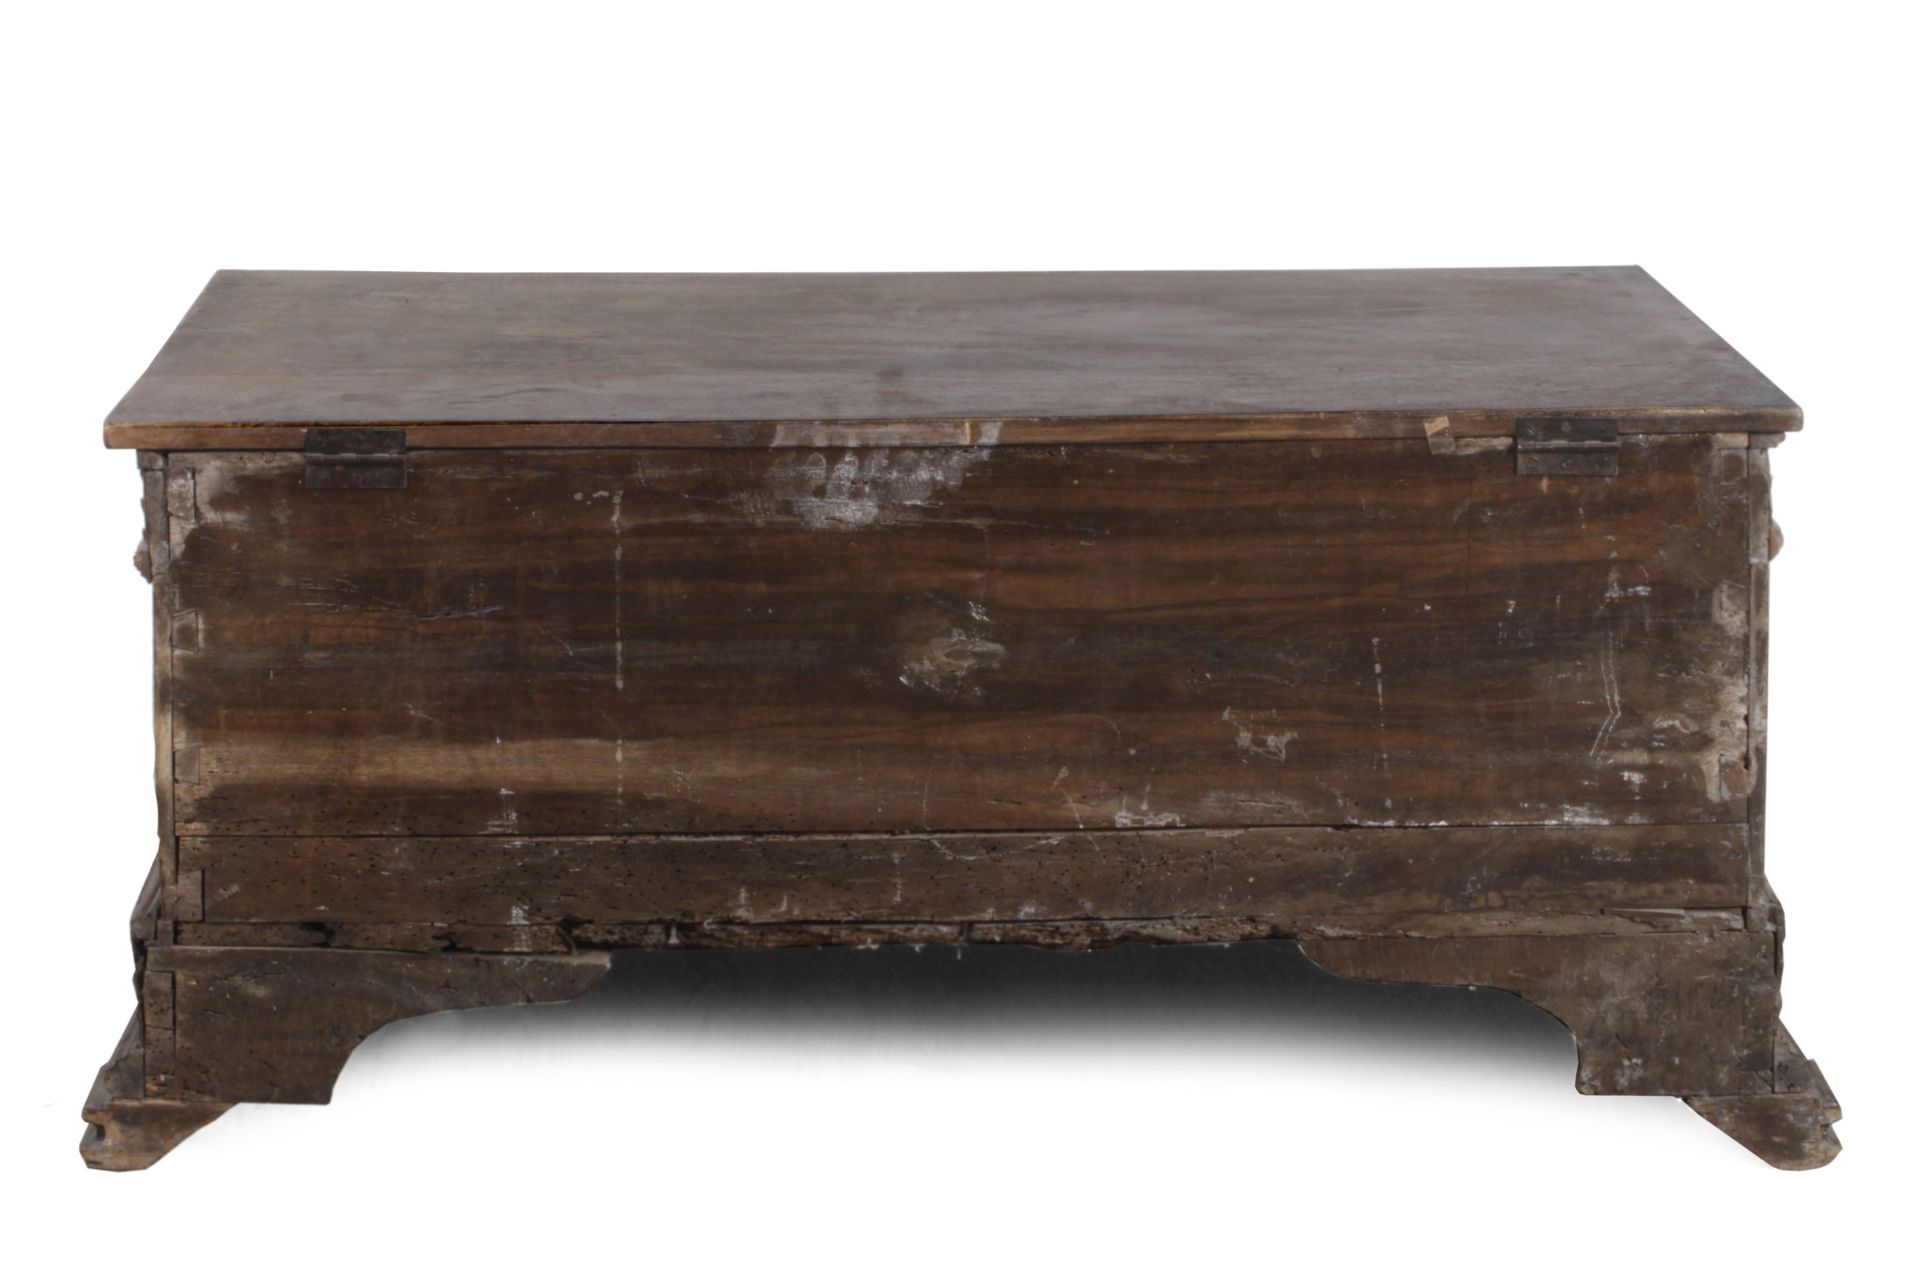 An 18th century walnut bride chest - Image 4 of 4